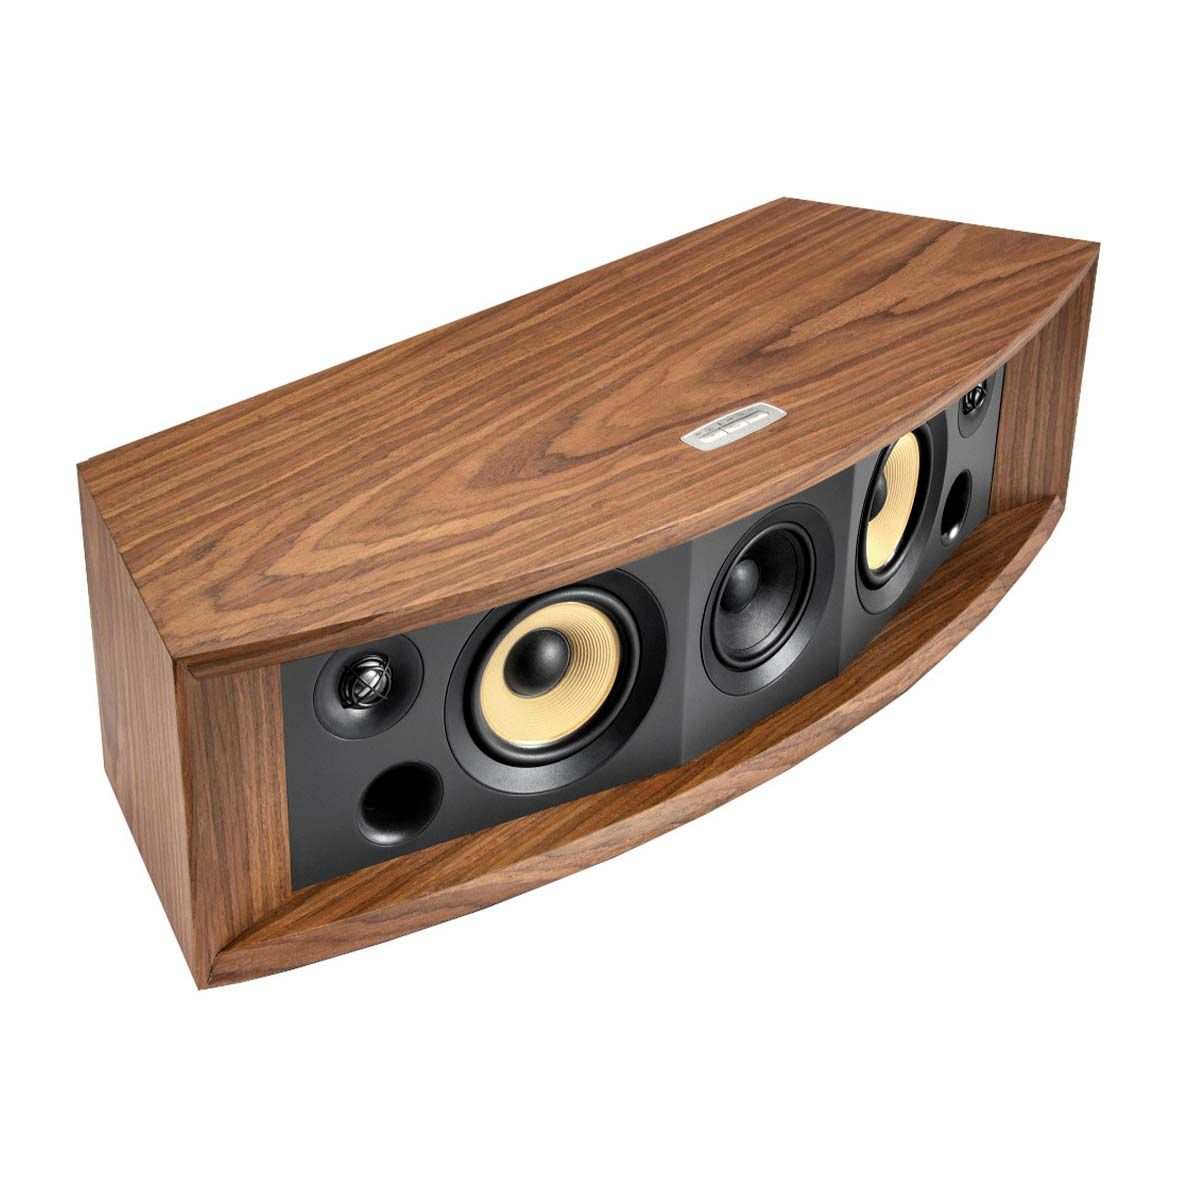 JBL L75ms Music System - Walnut angled front view without grille